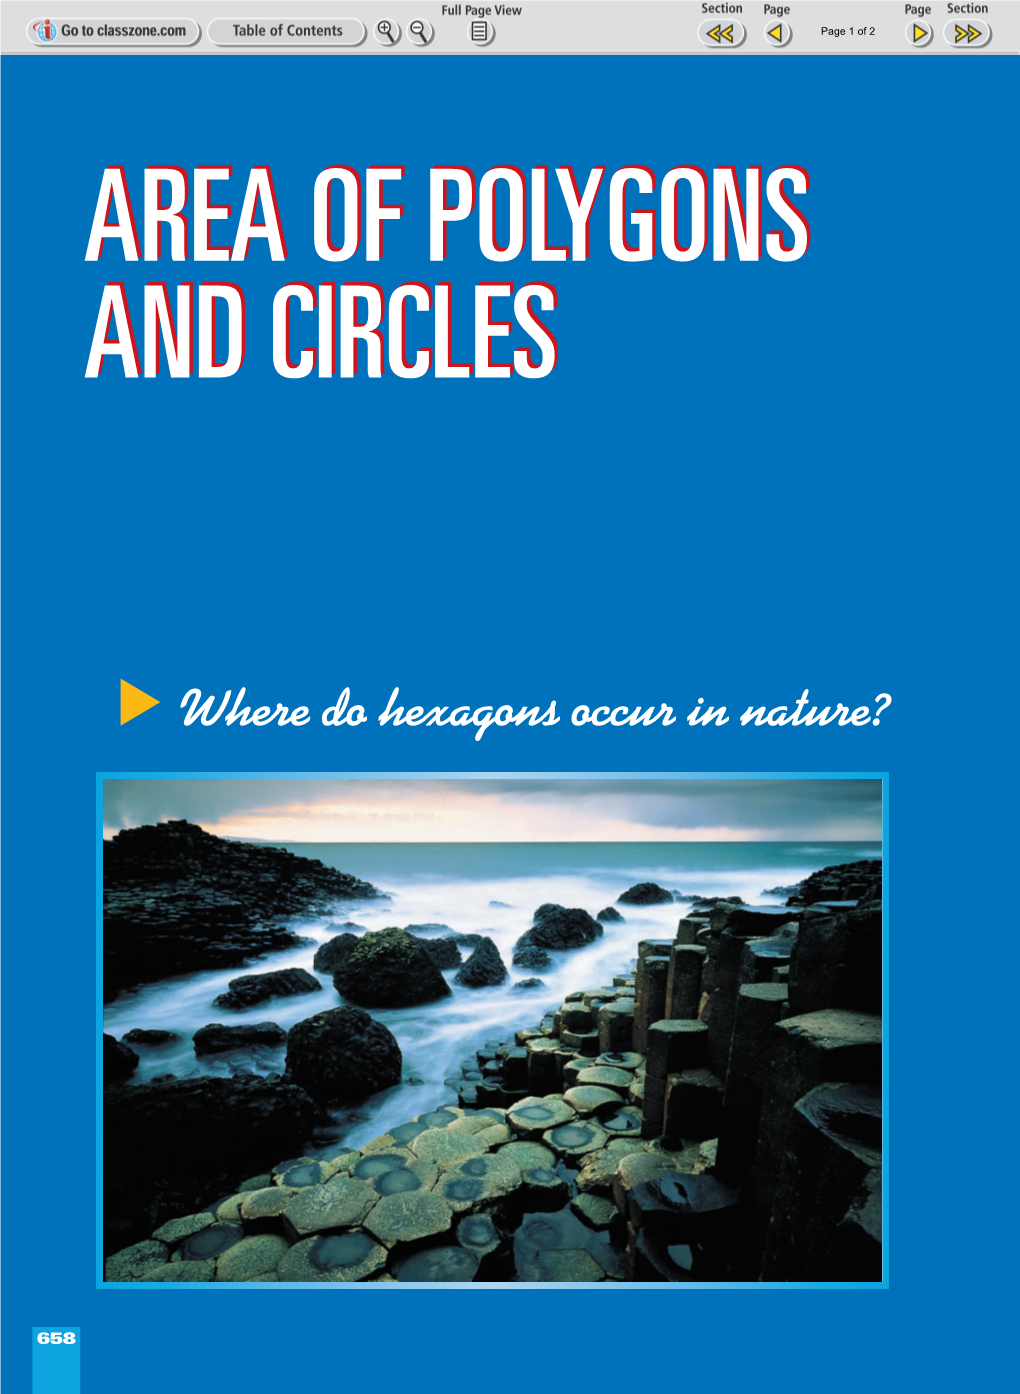 Where Do Hexagons Occur in Nature?